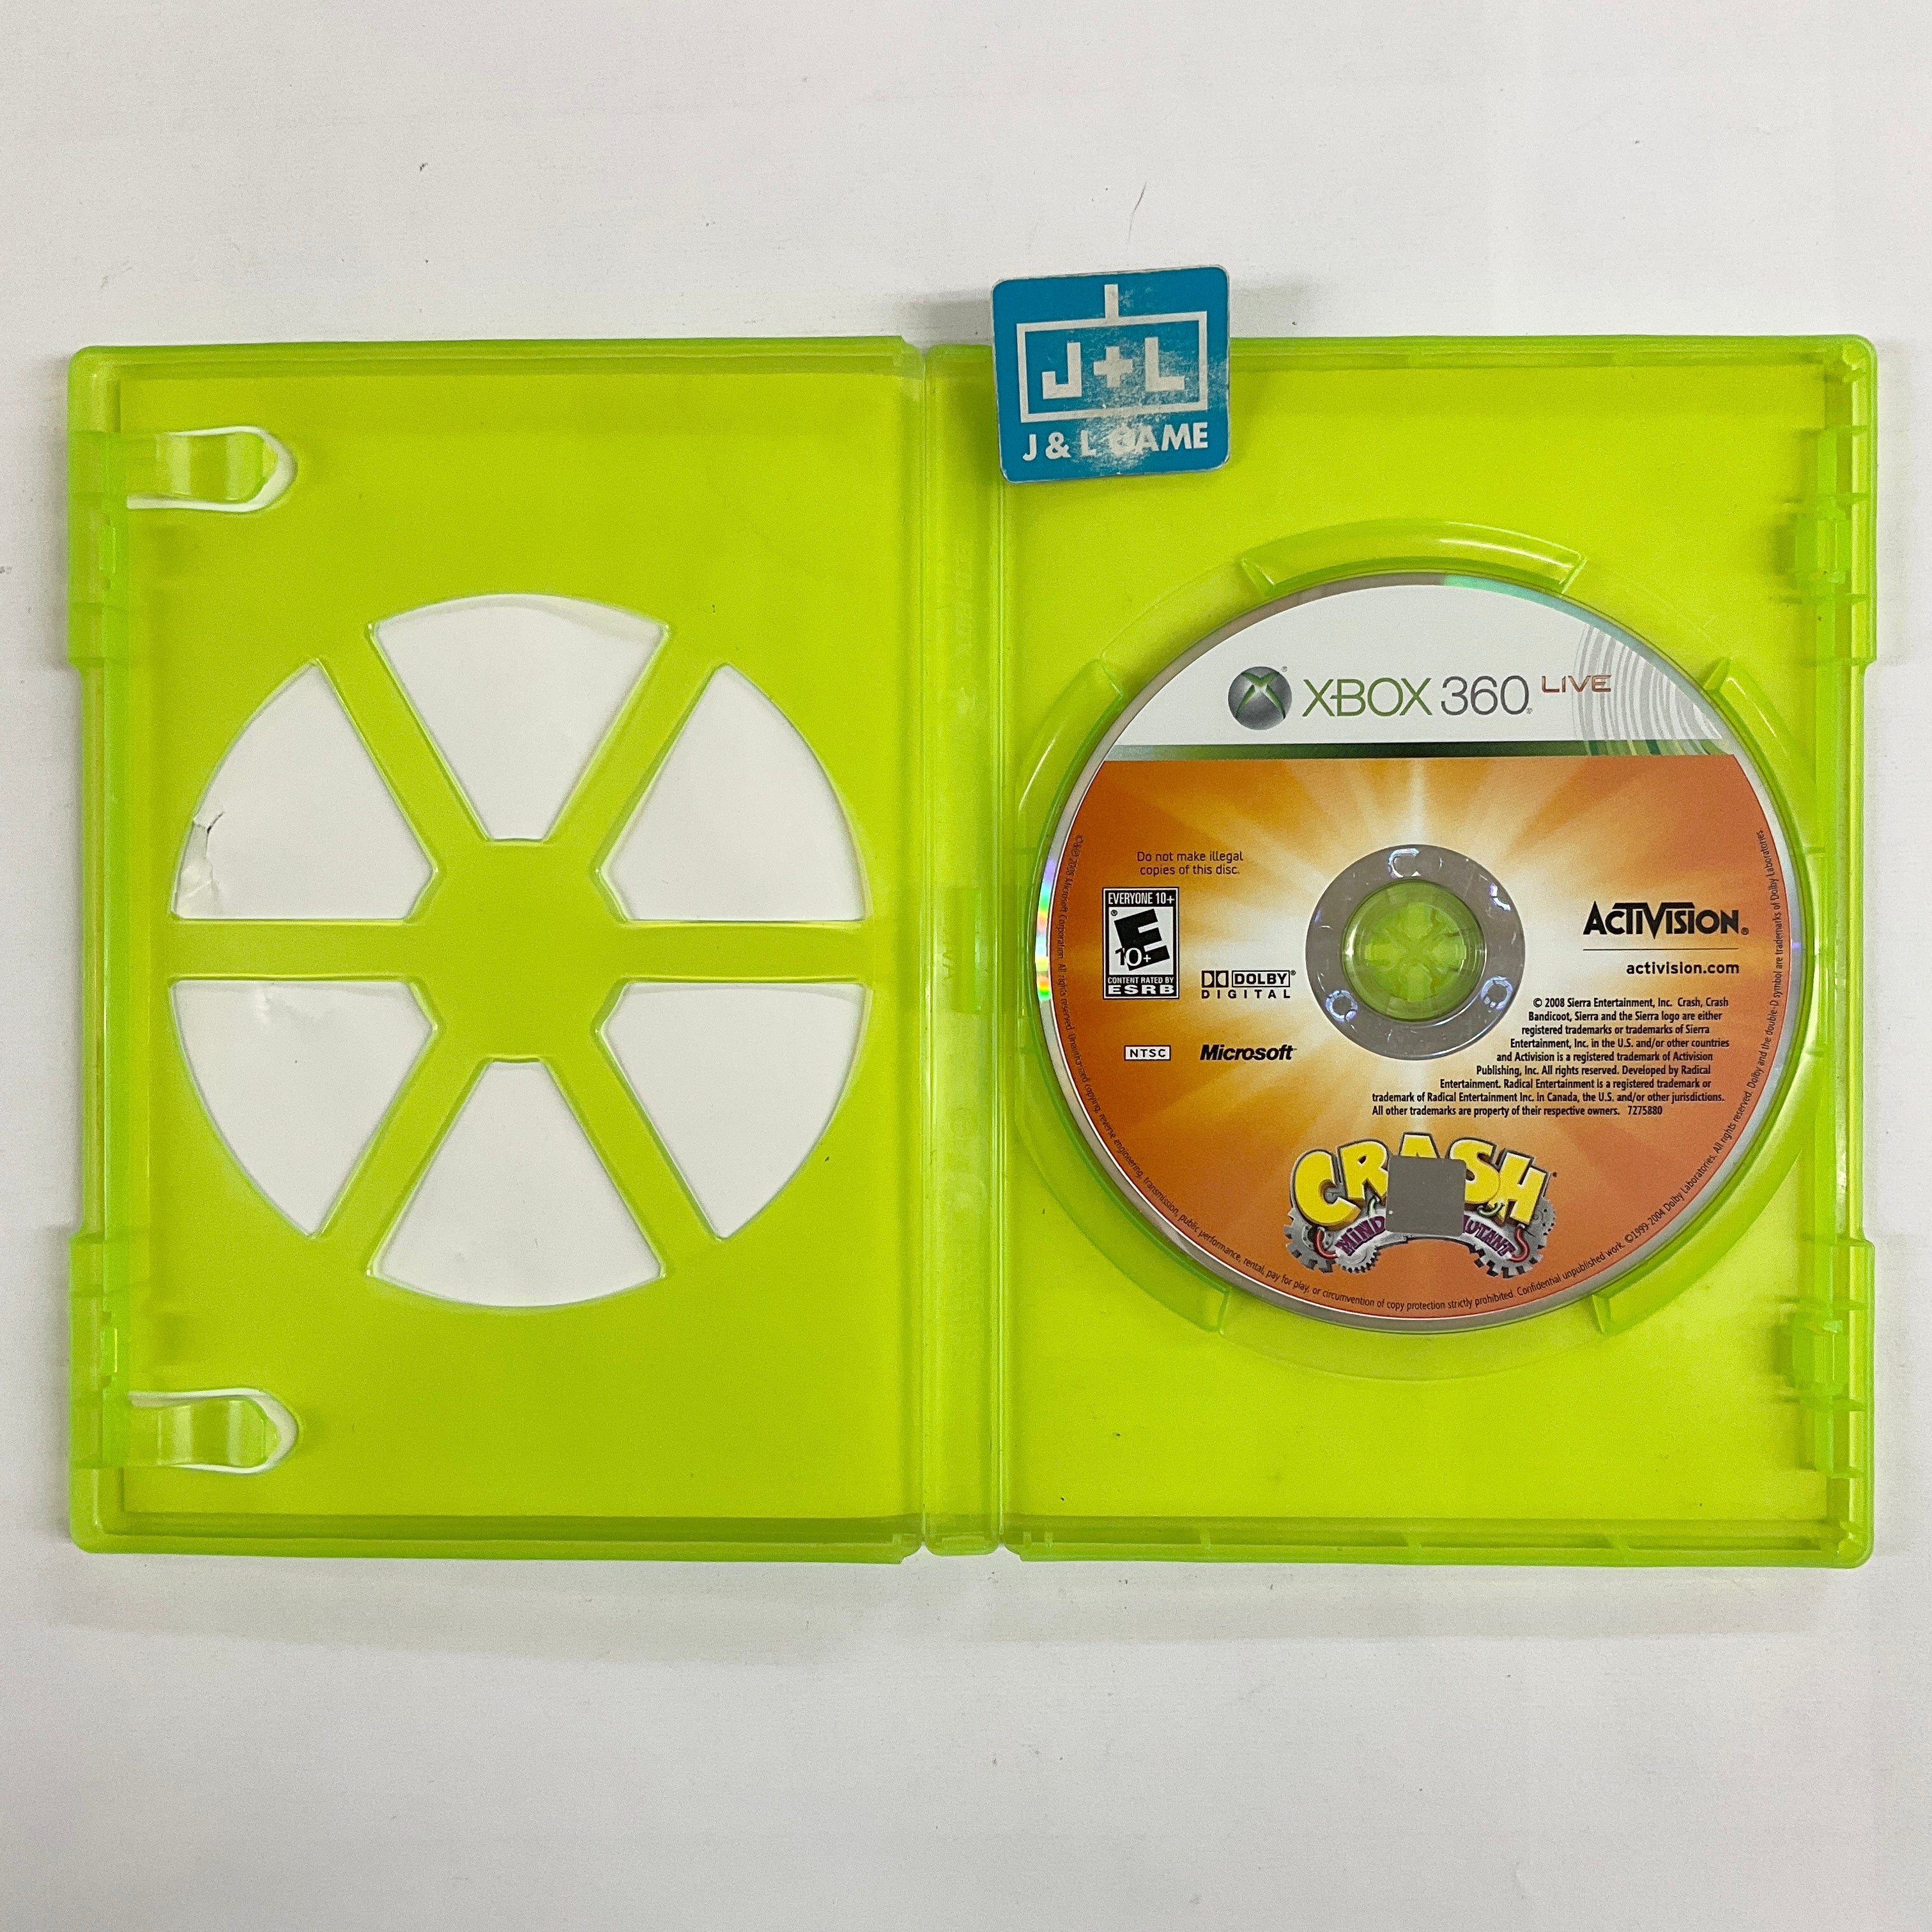 Crash: Mind Over Mutant - Xbox 360 [Pre-Owned] Video Games Activision   